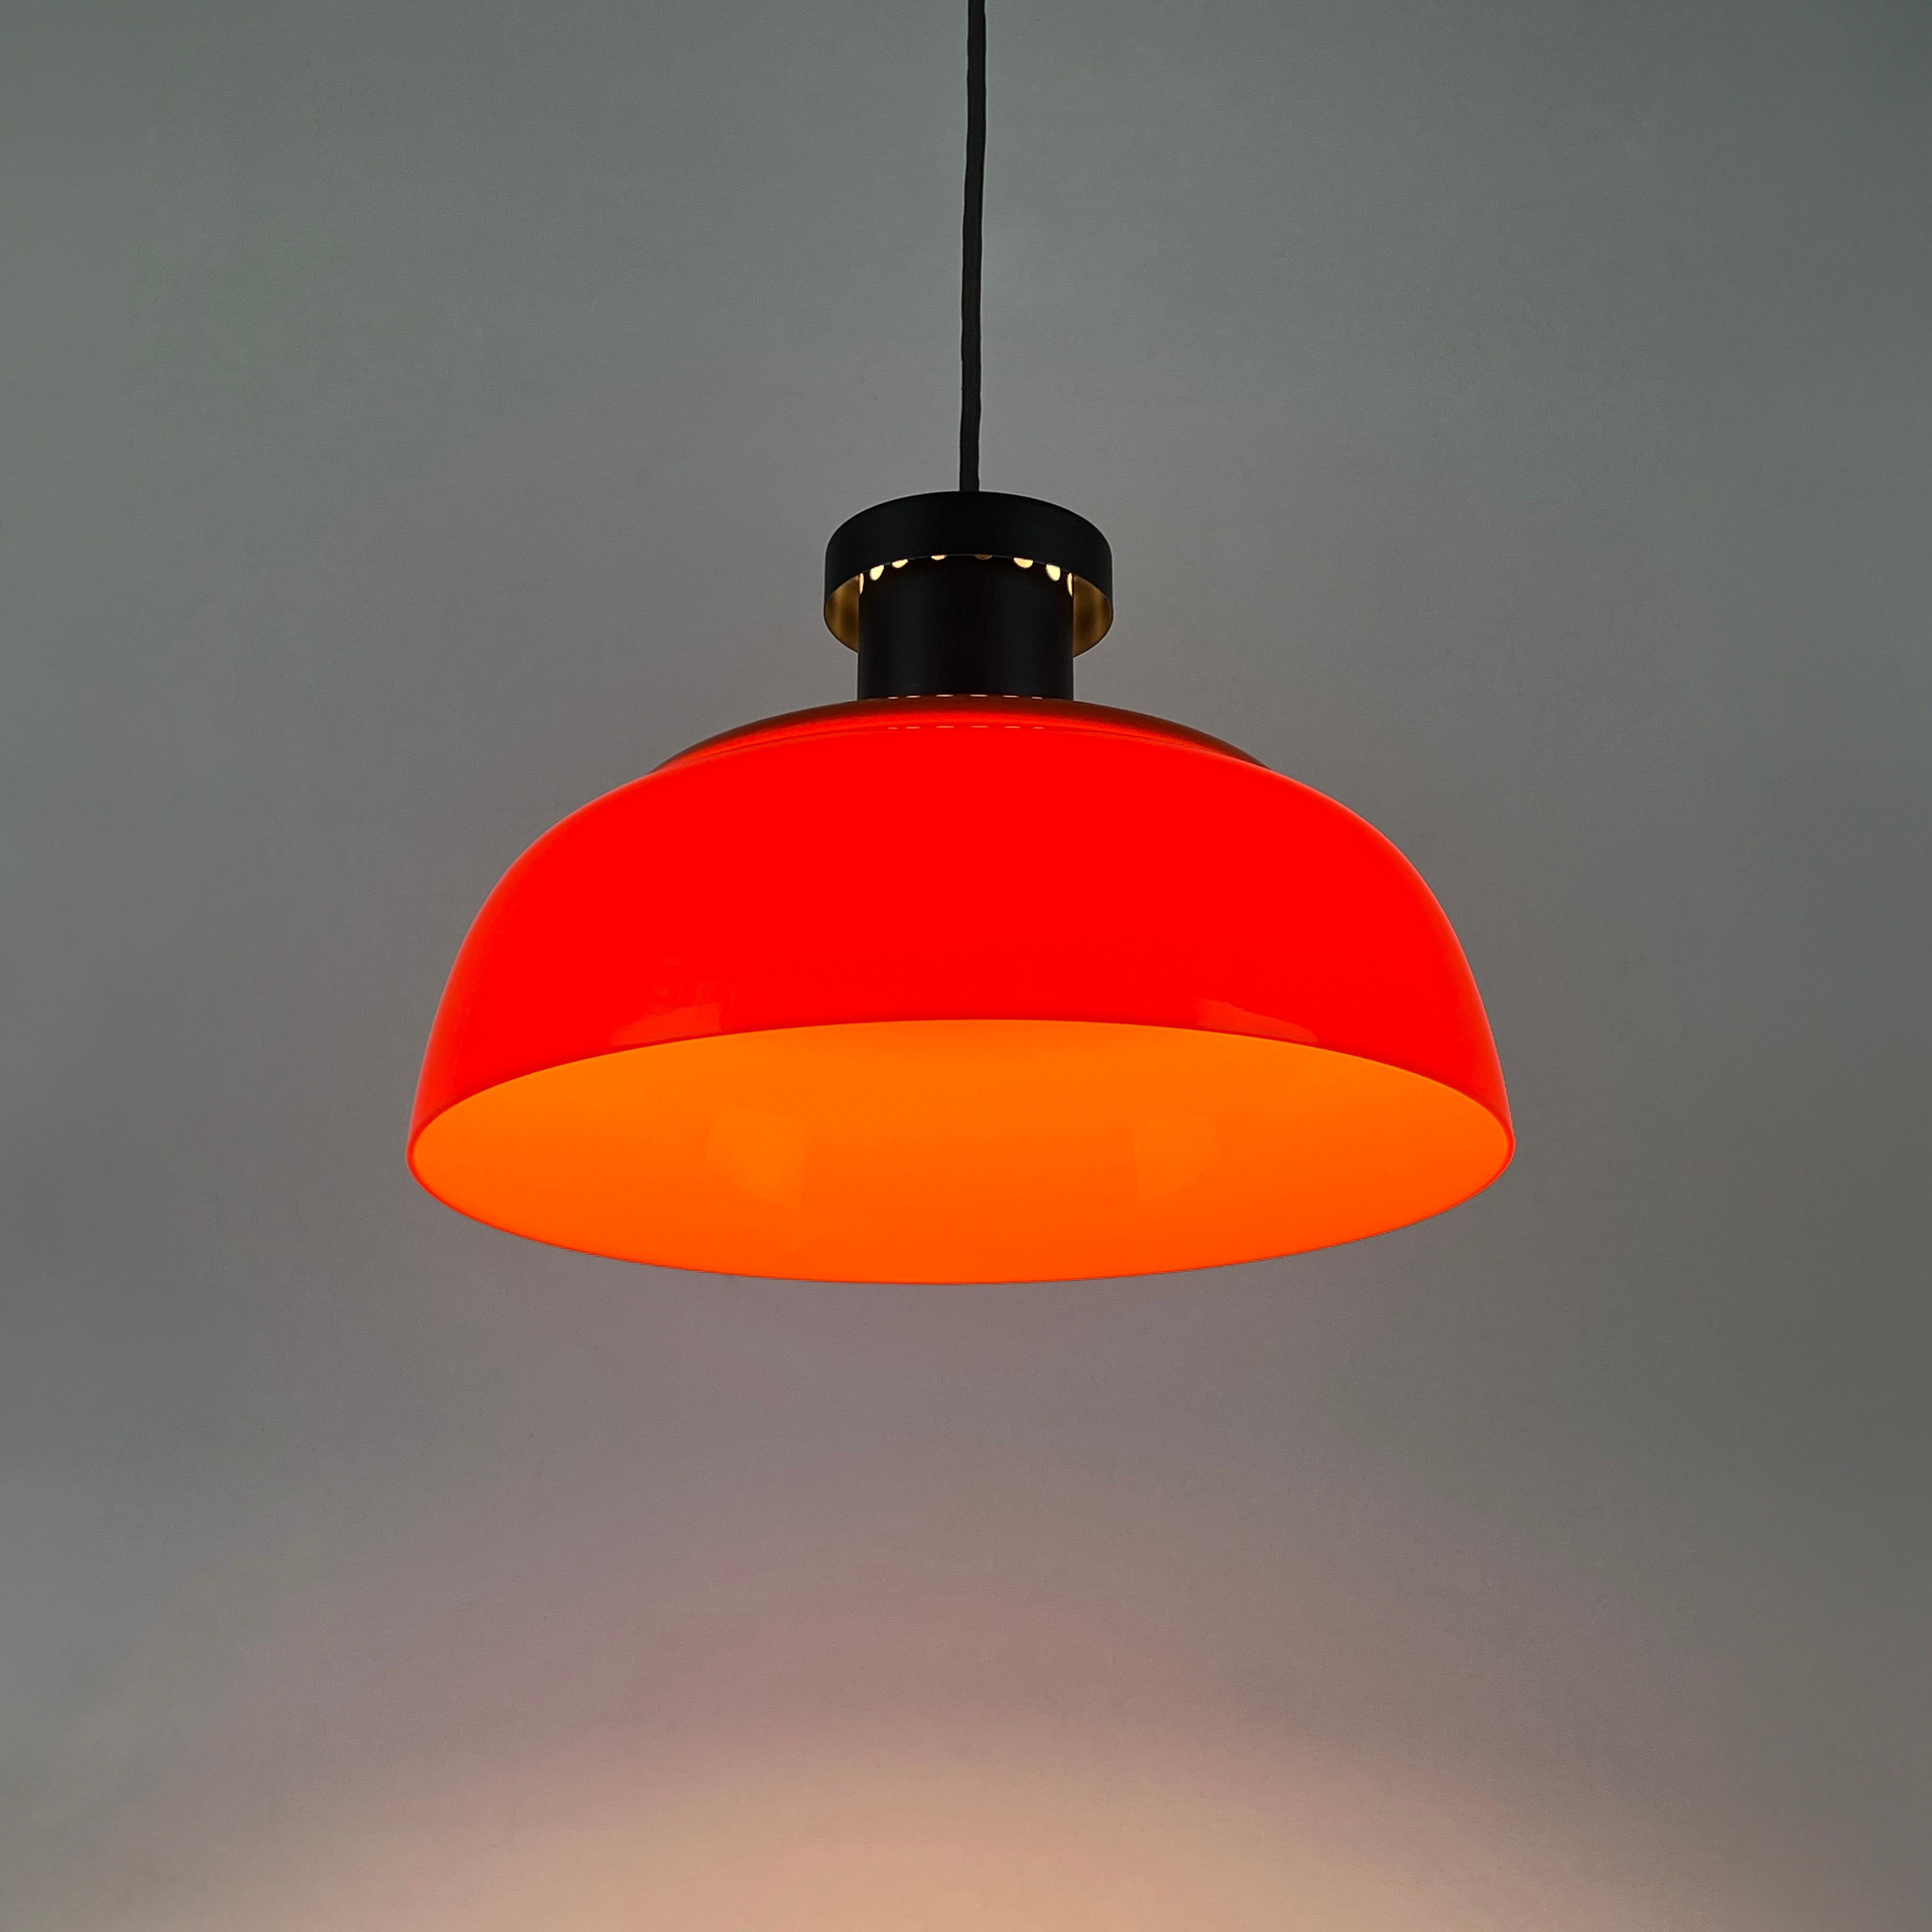 The Kartell KD7 stands as a rare and contemporary classic, embodying the timeless brilliance of 1950s/1960s Italian design. Crafted by Kartell, this extraordinary pendant lamp features nickel-plated metal elements. The distinctive round orange